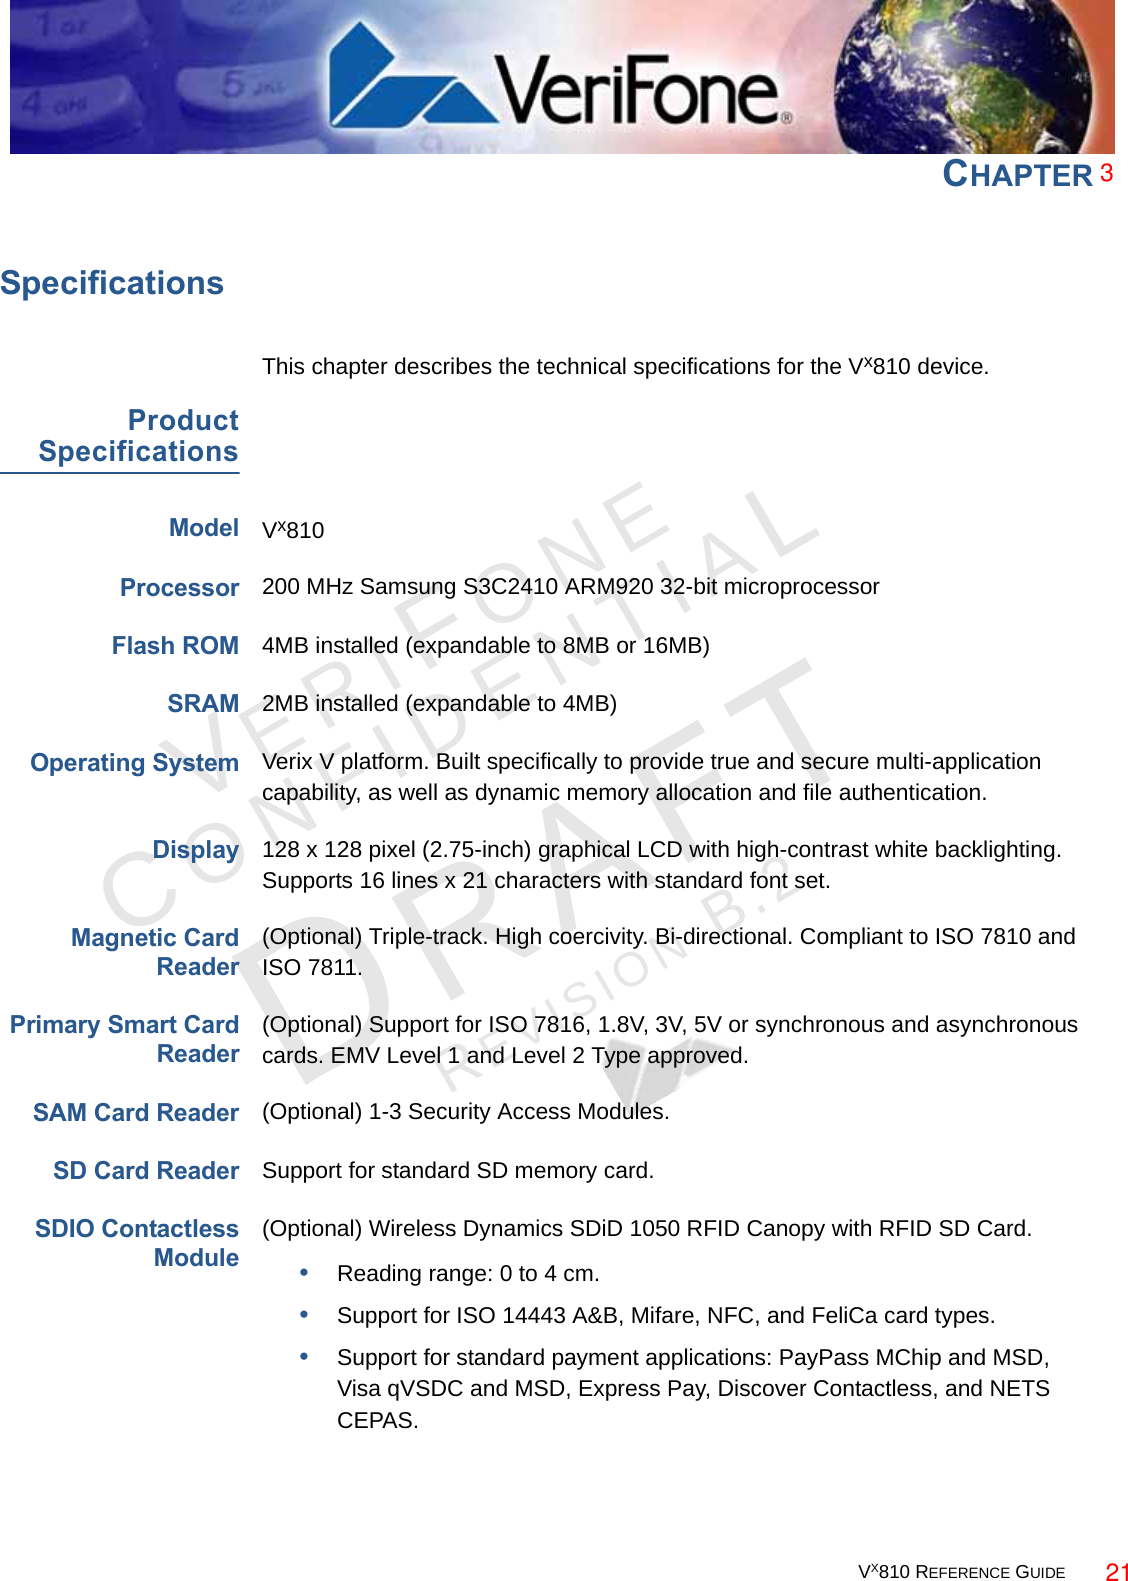 VX810 REFERENCE GUIDE 129VER I FO N ECONFID E NTIALREVISION B.2 CHAPTER 7SpecificationsThis chapter describes the technical specifications for the Vx810 device.ProductSpecificationsModelVx810Processor200 MHz Samsung S3C2410 ARM920 32-bit microprocessorFlash ROM4MB installed (expandable to 8MB or 16MB)SRAM2MB installed (expandable to 4MB)Operating SystemVerix V platform. Built specifically to provide true and secure multi-application capability, as well as dynamic memory allocation and file authentication.Display128 x 128 pixel (2.75-inch) graphical LCD with high-contrast white backlighting. Supports 16 lines x 21 characters with standard font set.Magnetic CardReader(Optional) Triple-track. High coercivity. Bi-directional. Compliant to ISO 7810 and ISO 7811.Primary Smart CardReader(Optional) Support for ISO 7816, 1.8V, 3V, 5V or synchronous and asynchronous cards. EMV Level 1 and Level 2 Type approved.SAM Card Reader(Optional) 1-3 Security Access Modules.SD Card ReaderSupport for standard SD memory card.SDIO ContactlessModule(Optional) Wireless Dynamics SDiD 1050 RFID Canopy with RFID SD Card.•Reading range: 0 to 4 cm.•Support for ISO 14443 A&amp;B, Mifare, NFC, and FeliCa card types.•Support for standard payment applications: PayPass MChip and MSD, Visa qVSDC and MSD, Express Pay, Discover Contactless, and NETS CEPAS.321